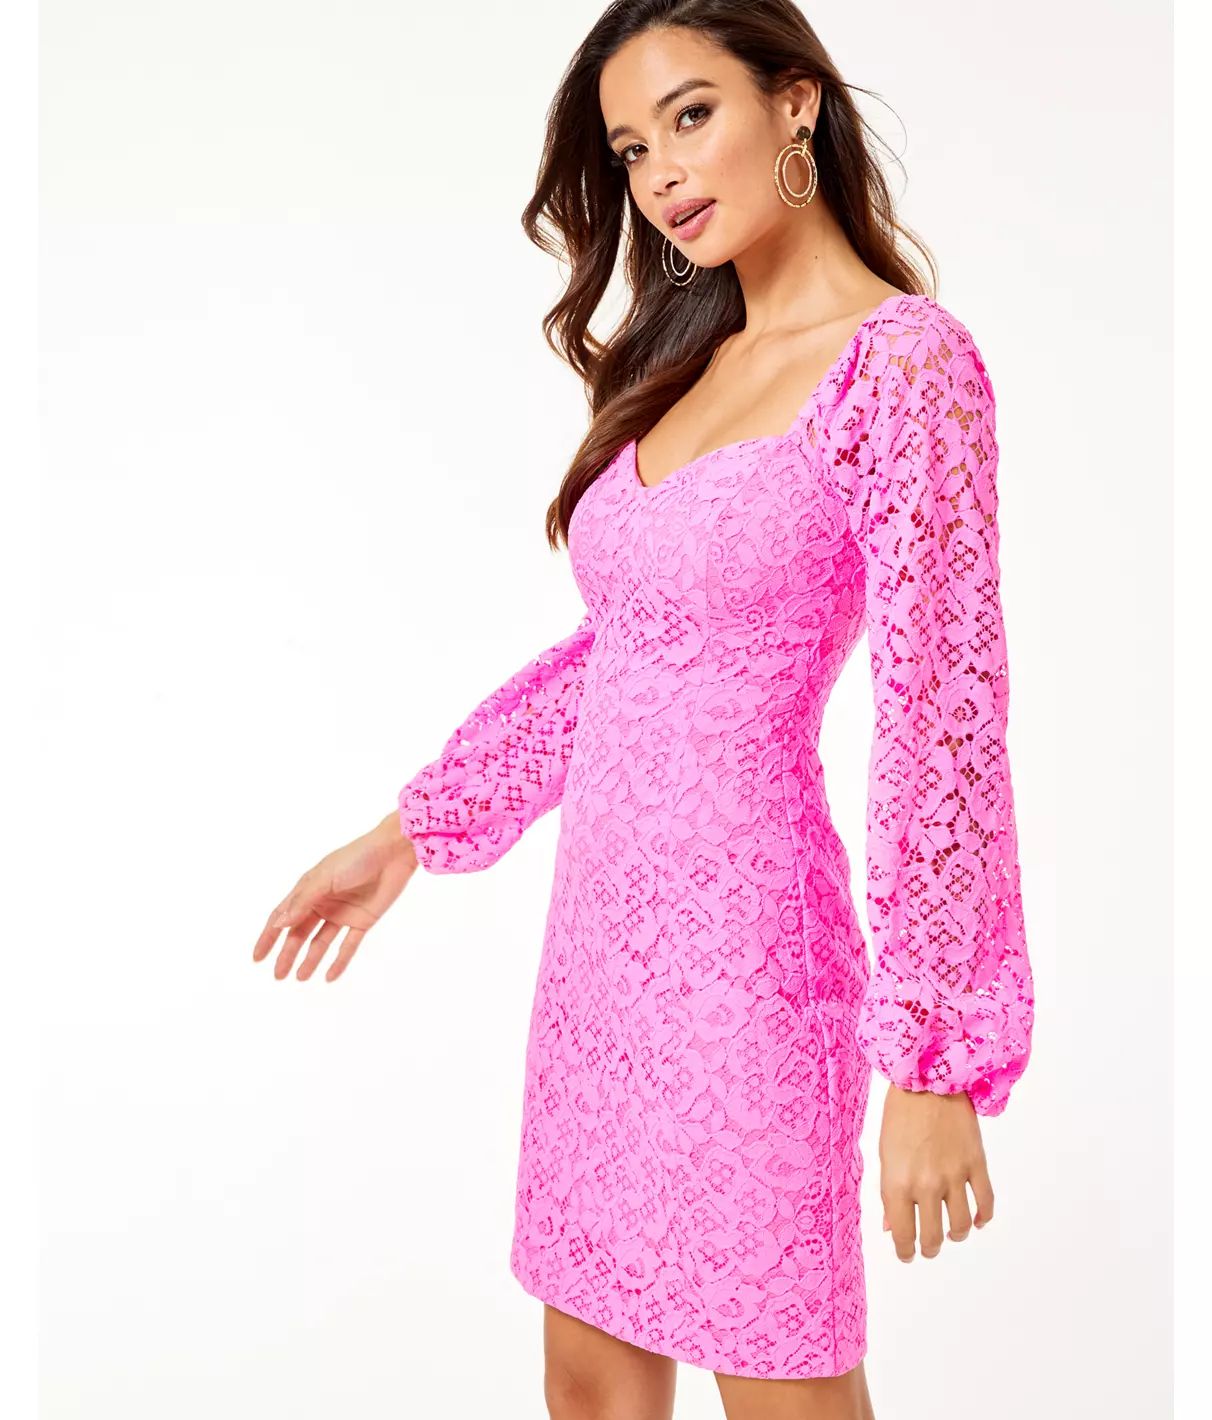 Lilly Pulitzer Juliah Dress | Lilly Pulitzer